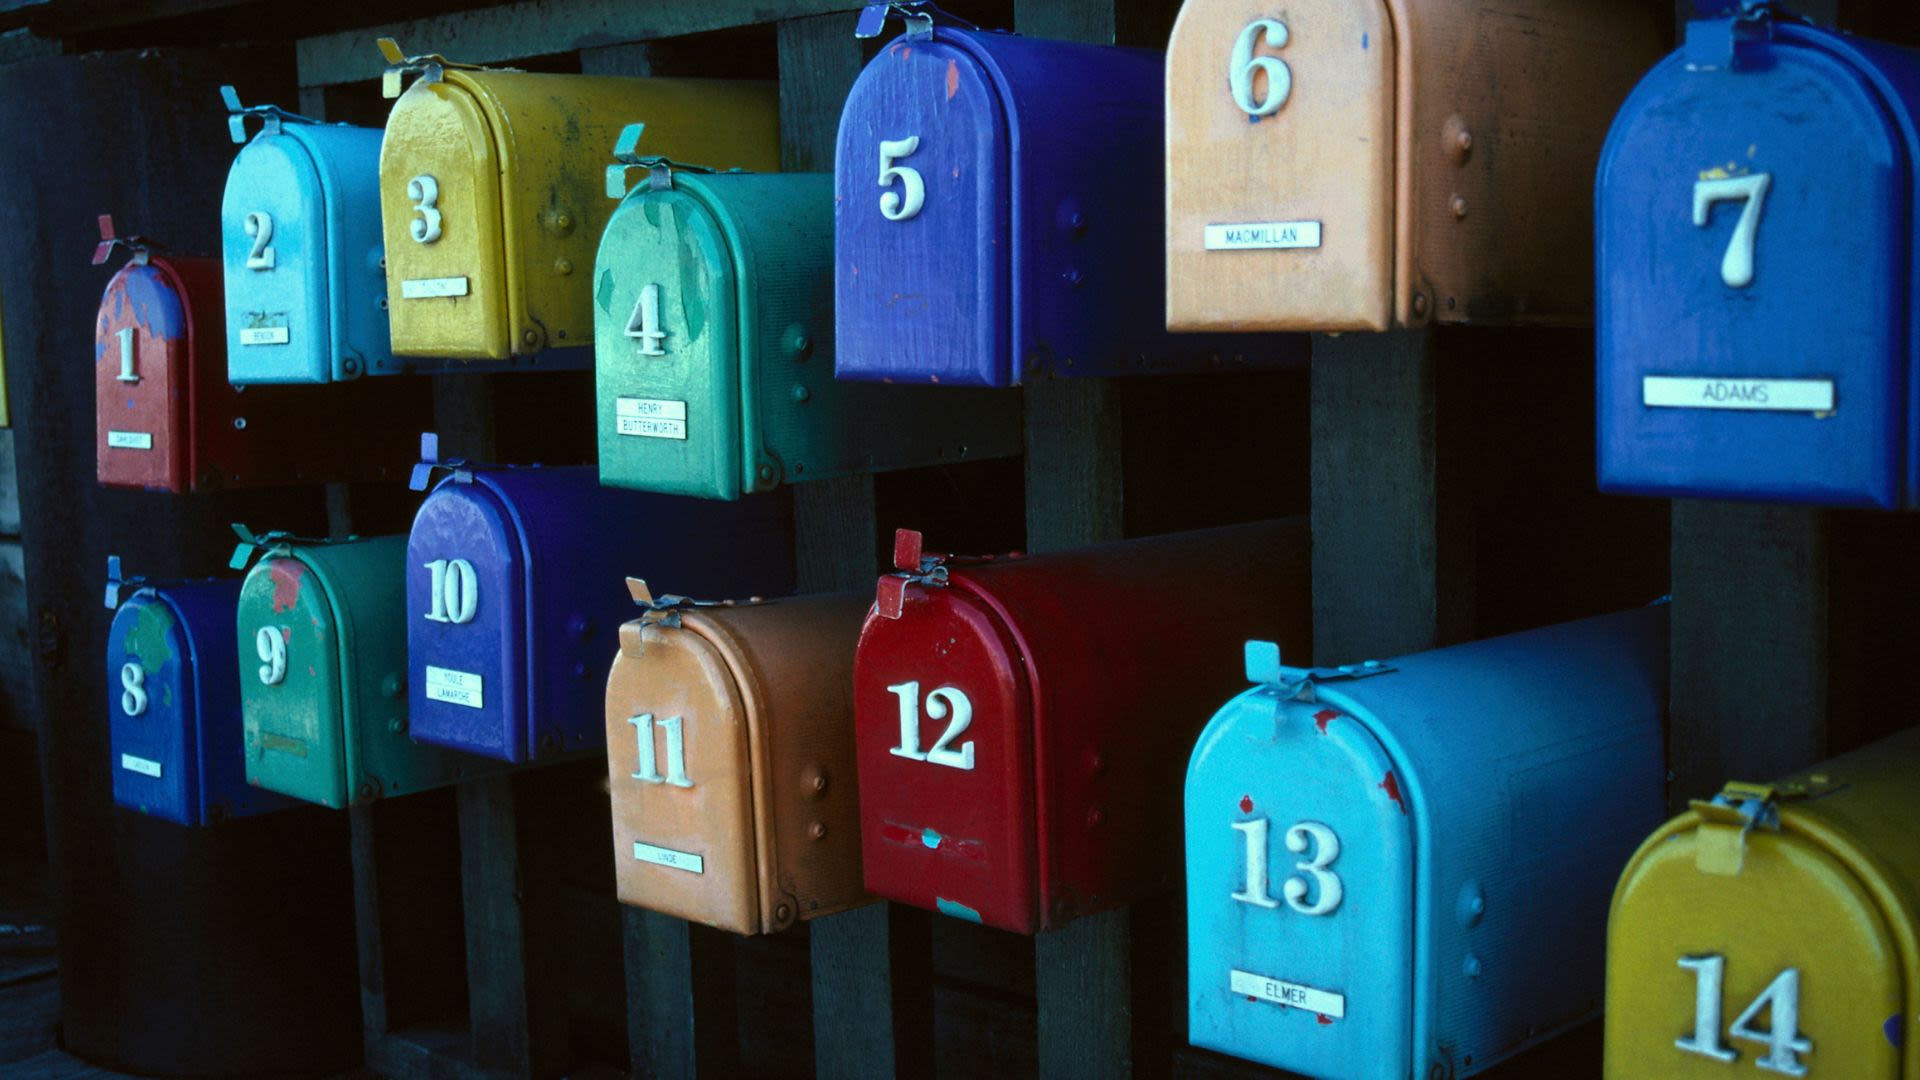 This picture shows many colorful mailboxes. It is meant to illustrate that there are different protocols through which emails can be sent and received. 